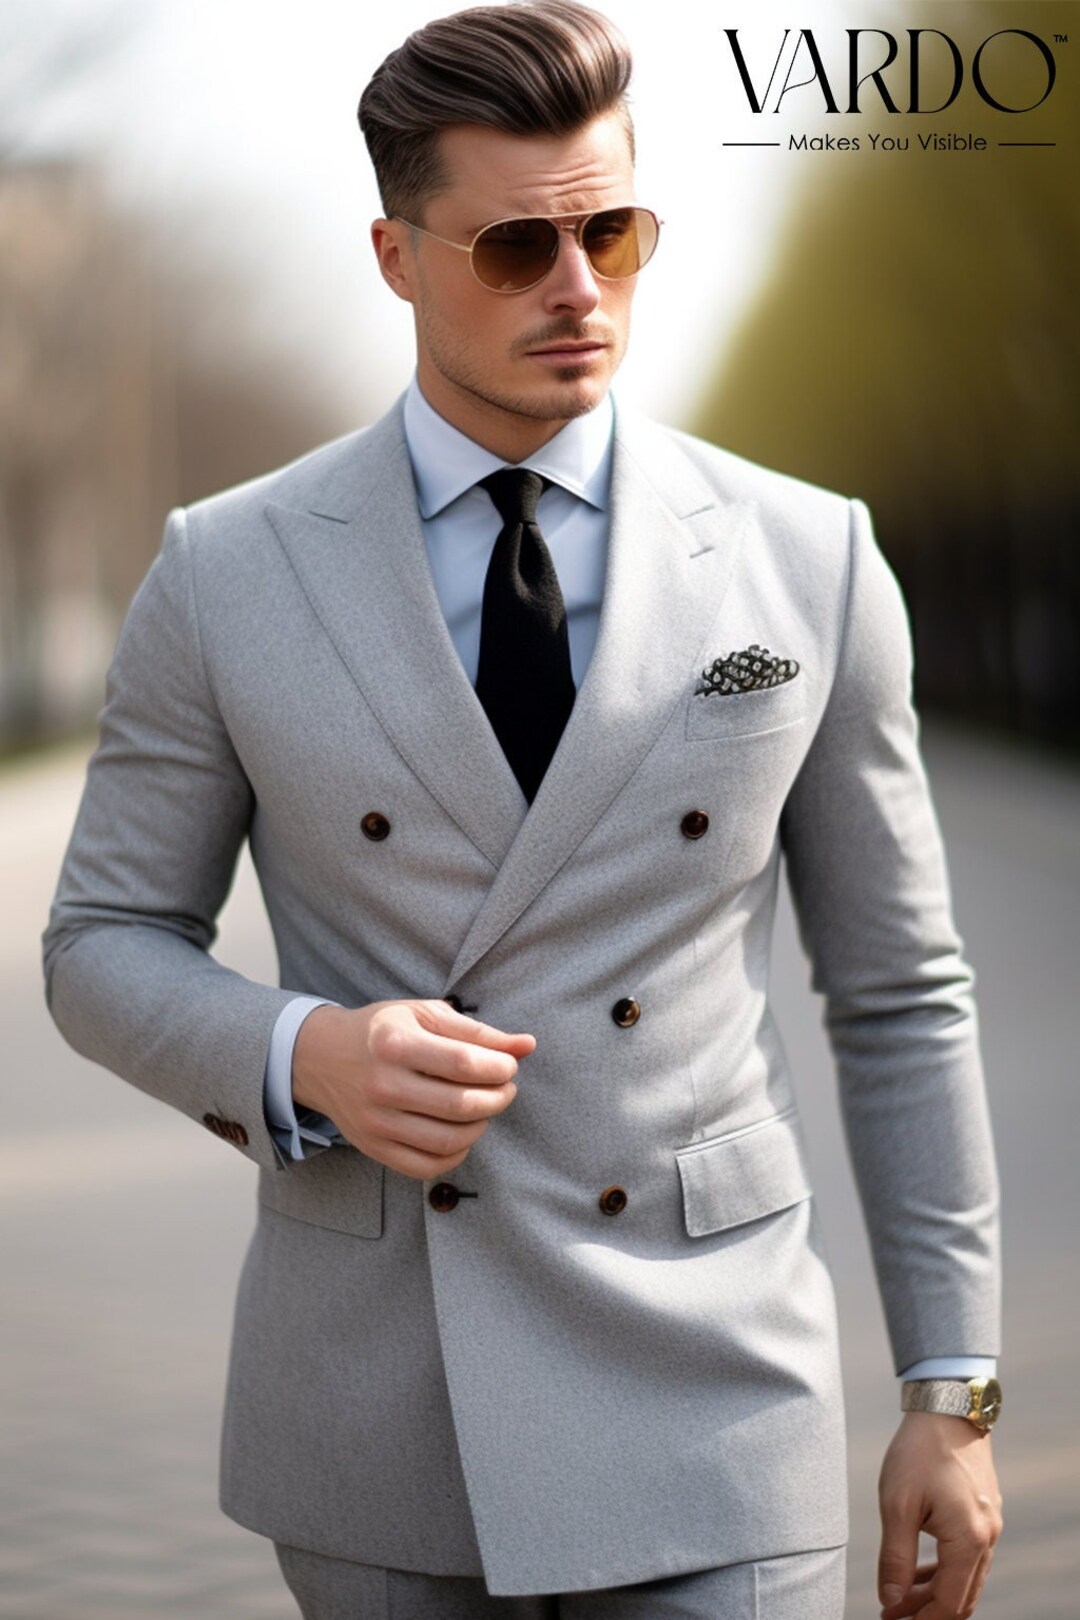 Light Grey Double Breasted Suit for Men Premium Formal Attire Tailored ...